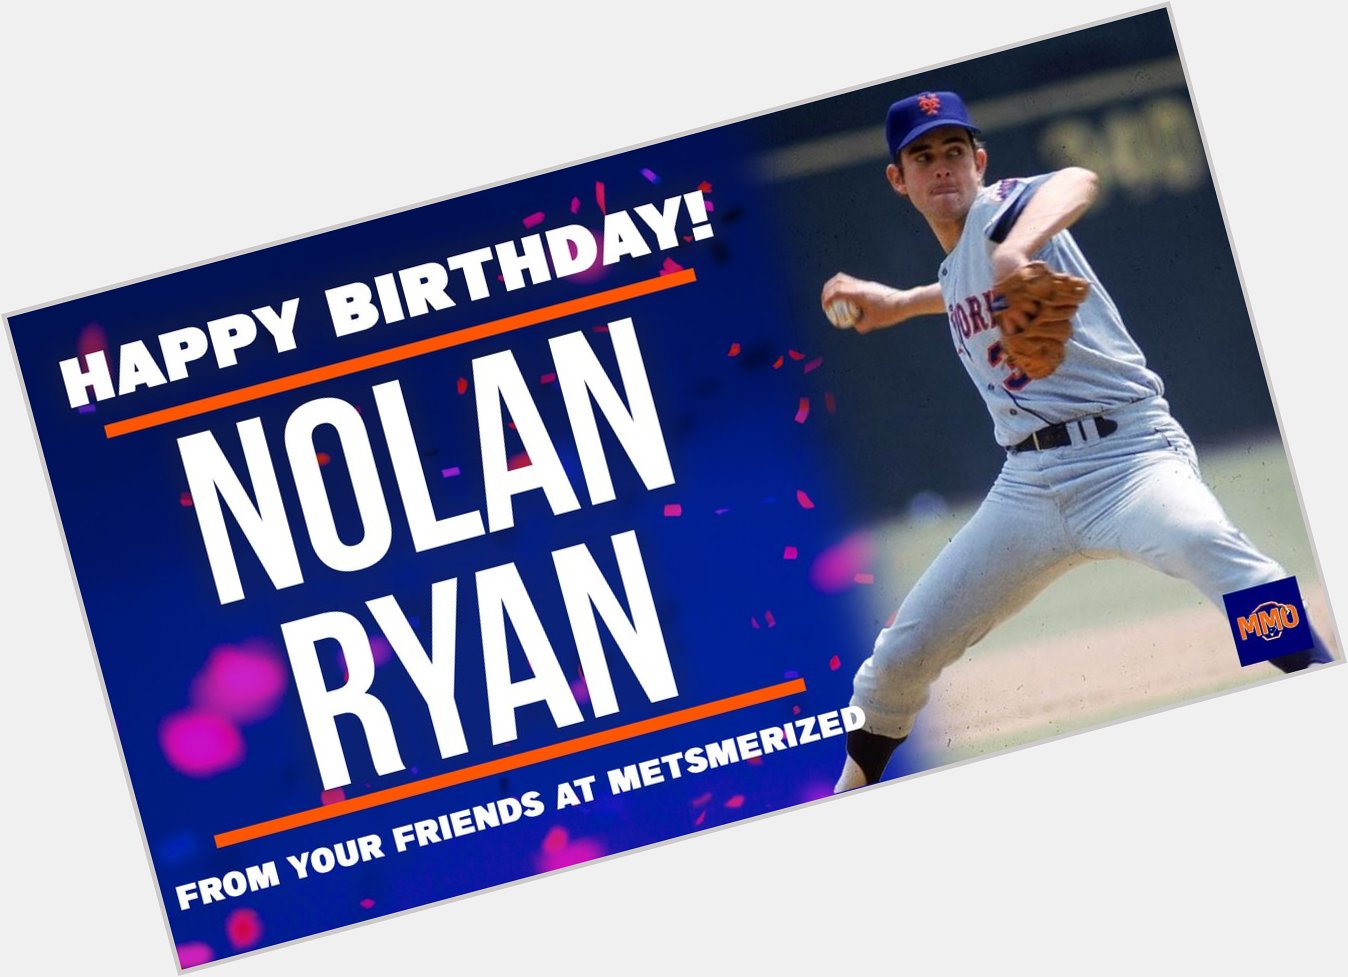 Happy Birthday to one of the greatest pitchers in MLB history and 1969 World Series Champion, Nolan Ryan! 